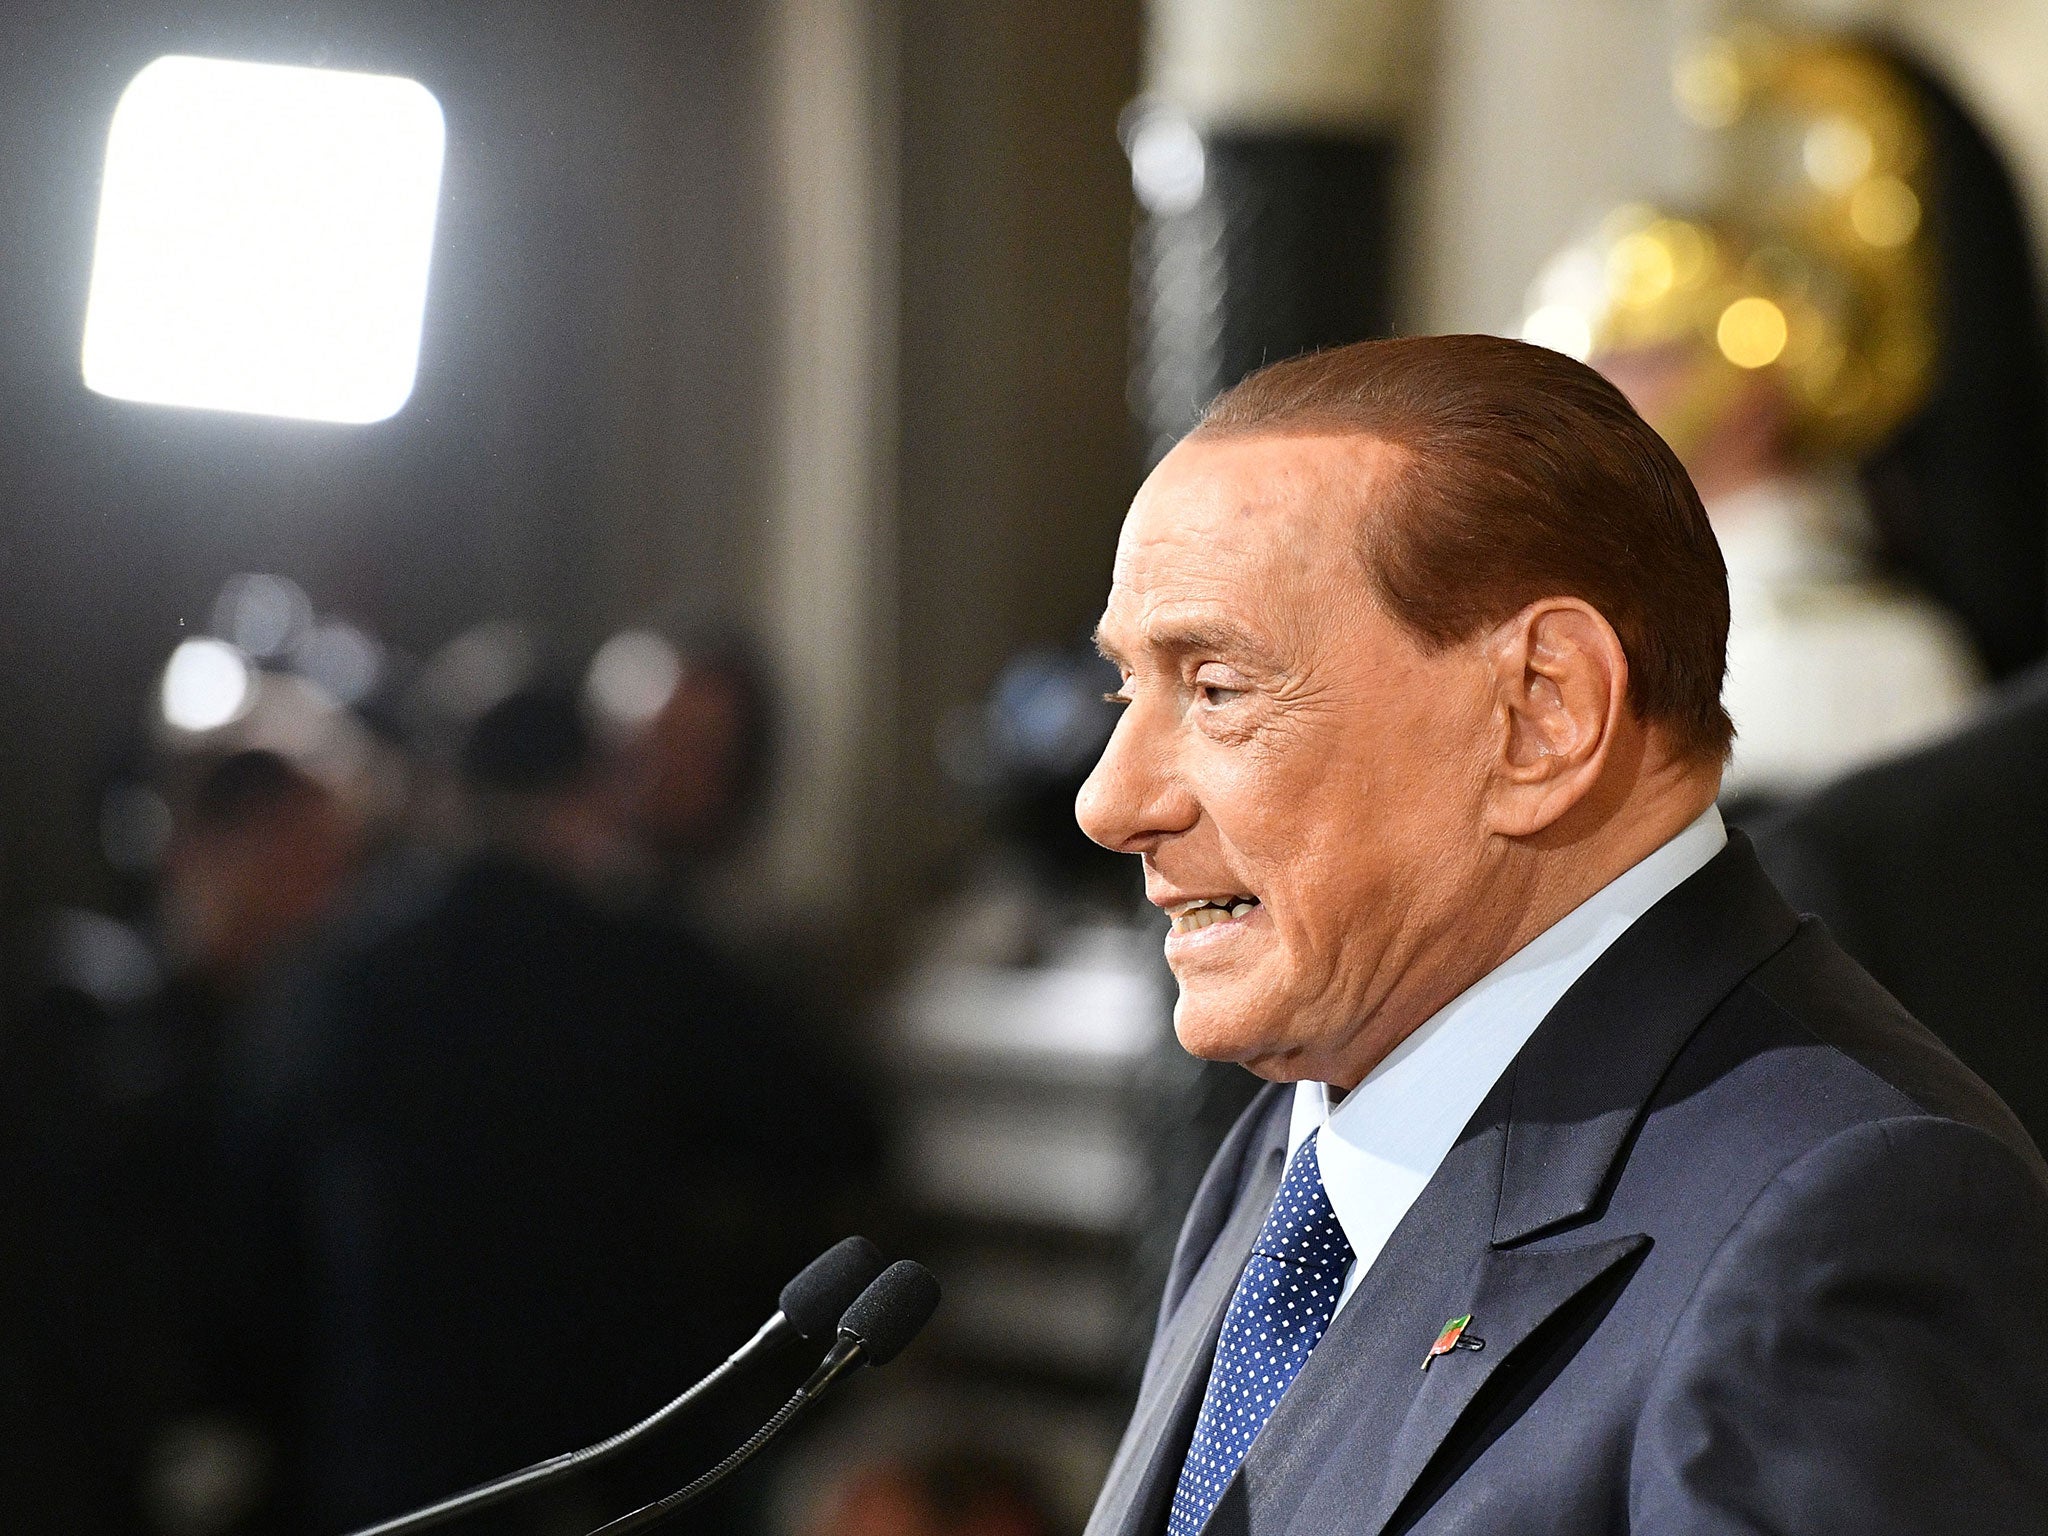 Berlusconi has held the office of Italian Prime Minister four times